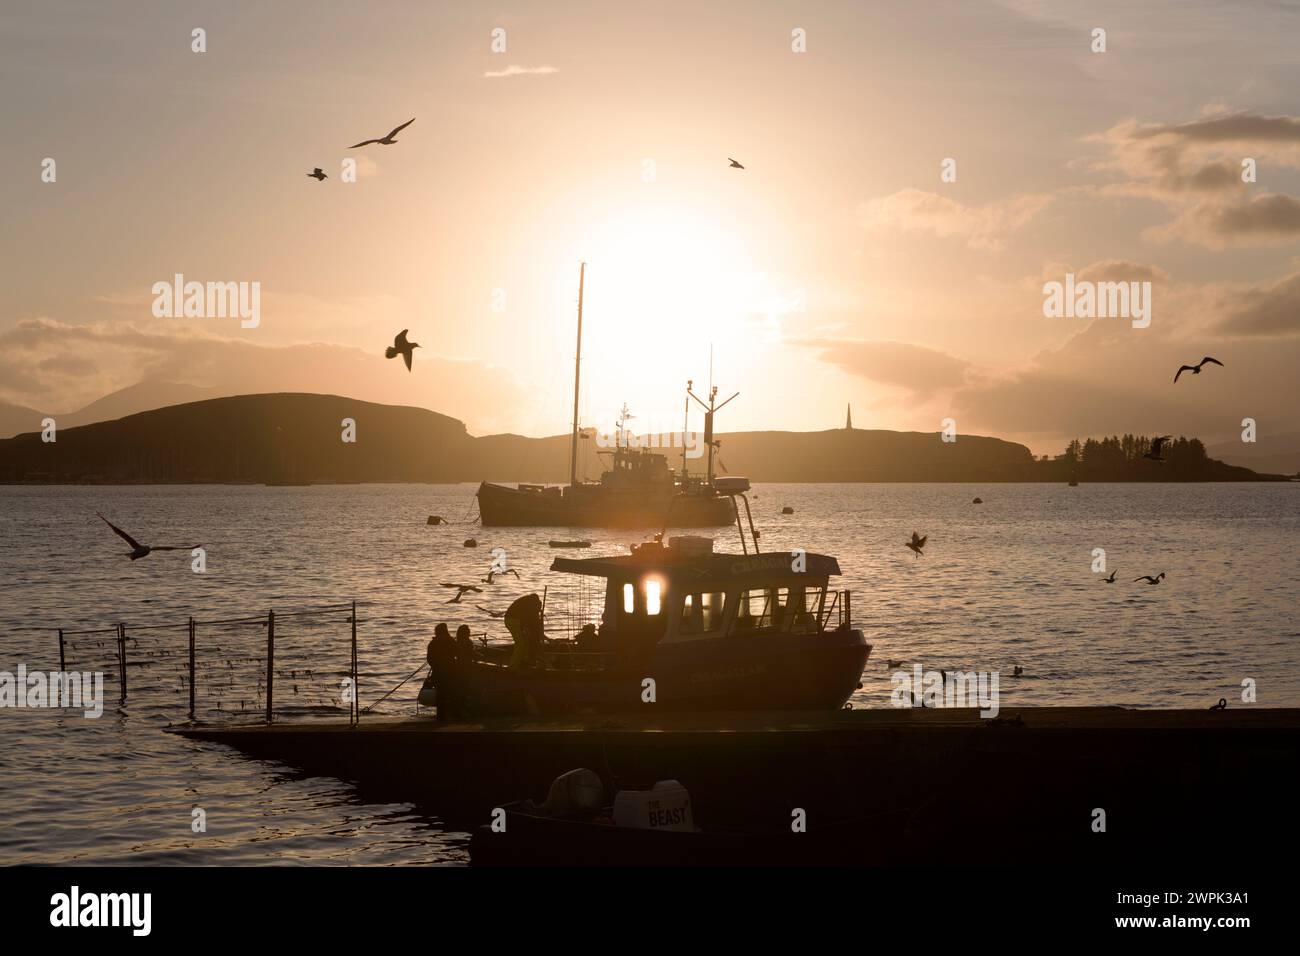 UK, Scotland, Oban, sunset over the harbour. Stock Photo